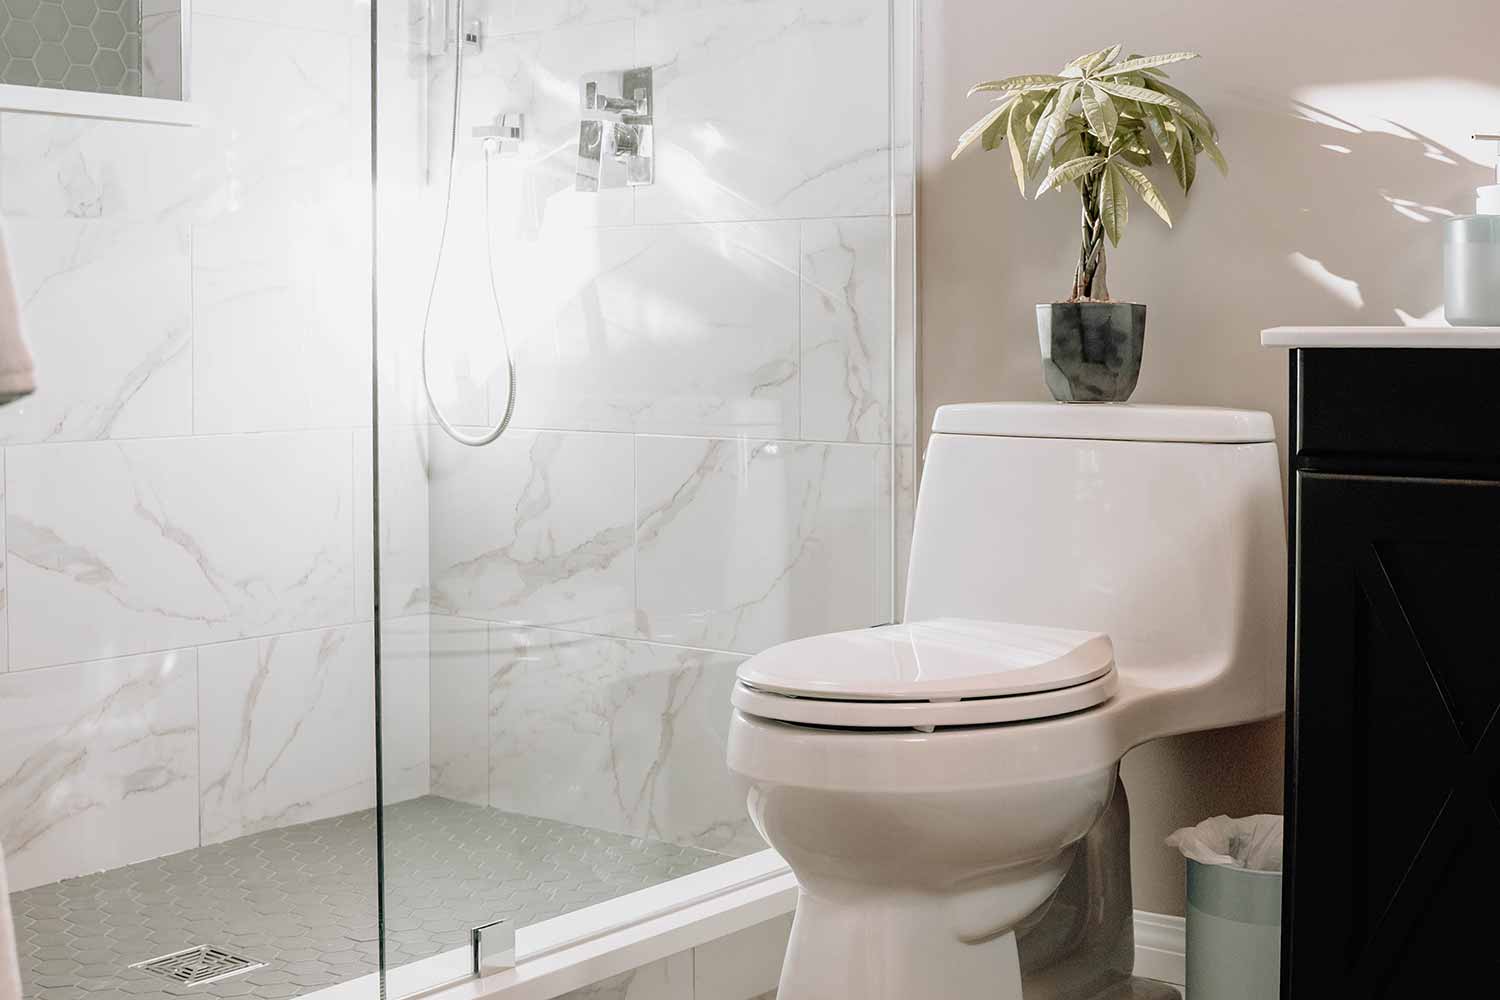 5 Best Appliances To Have In Your New Bathroom Renovation